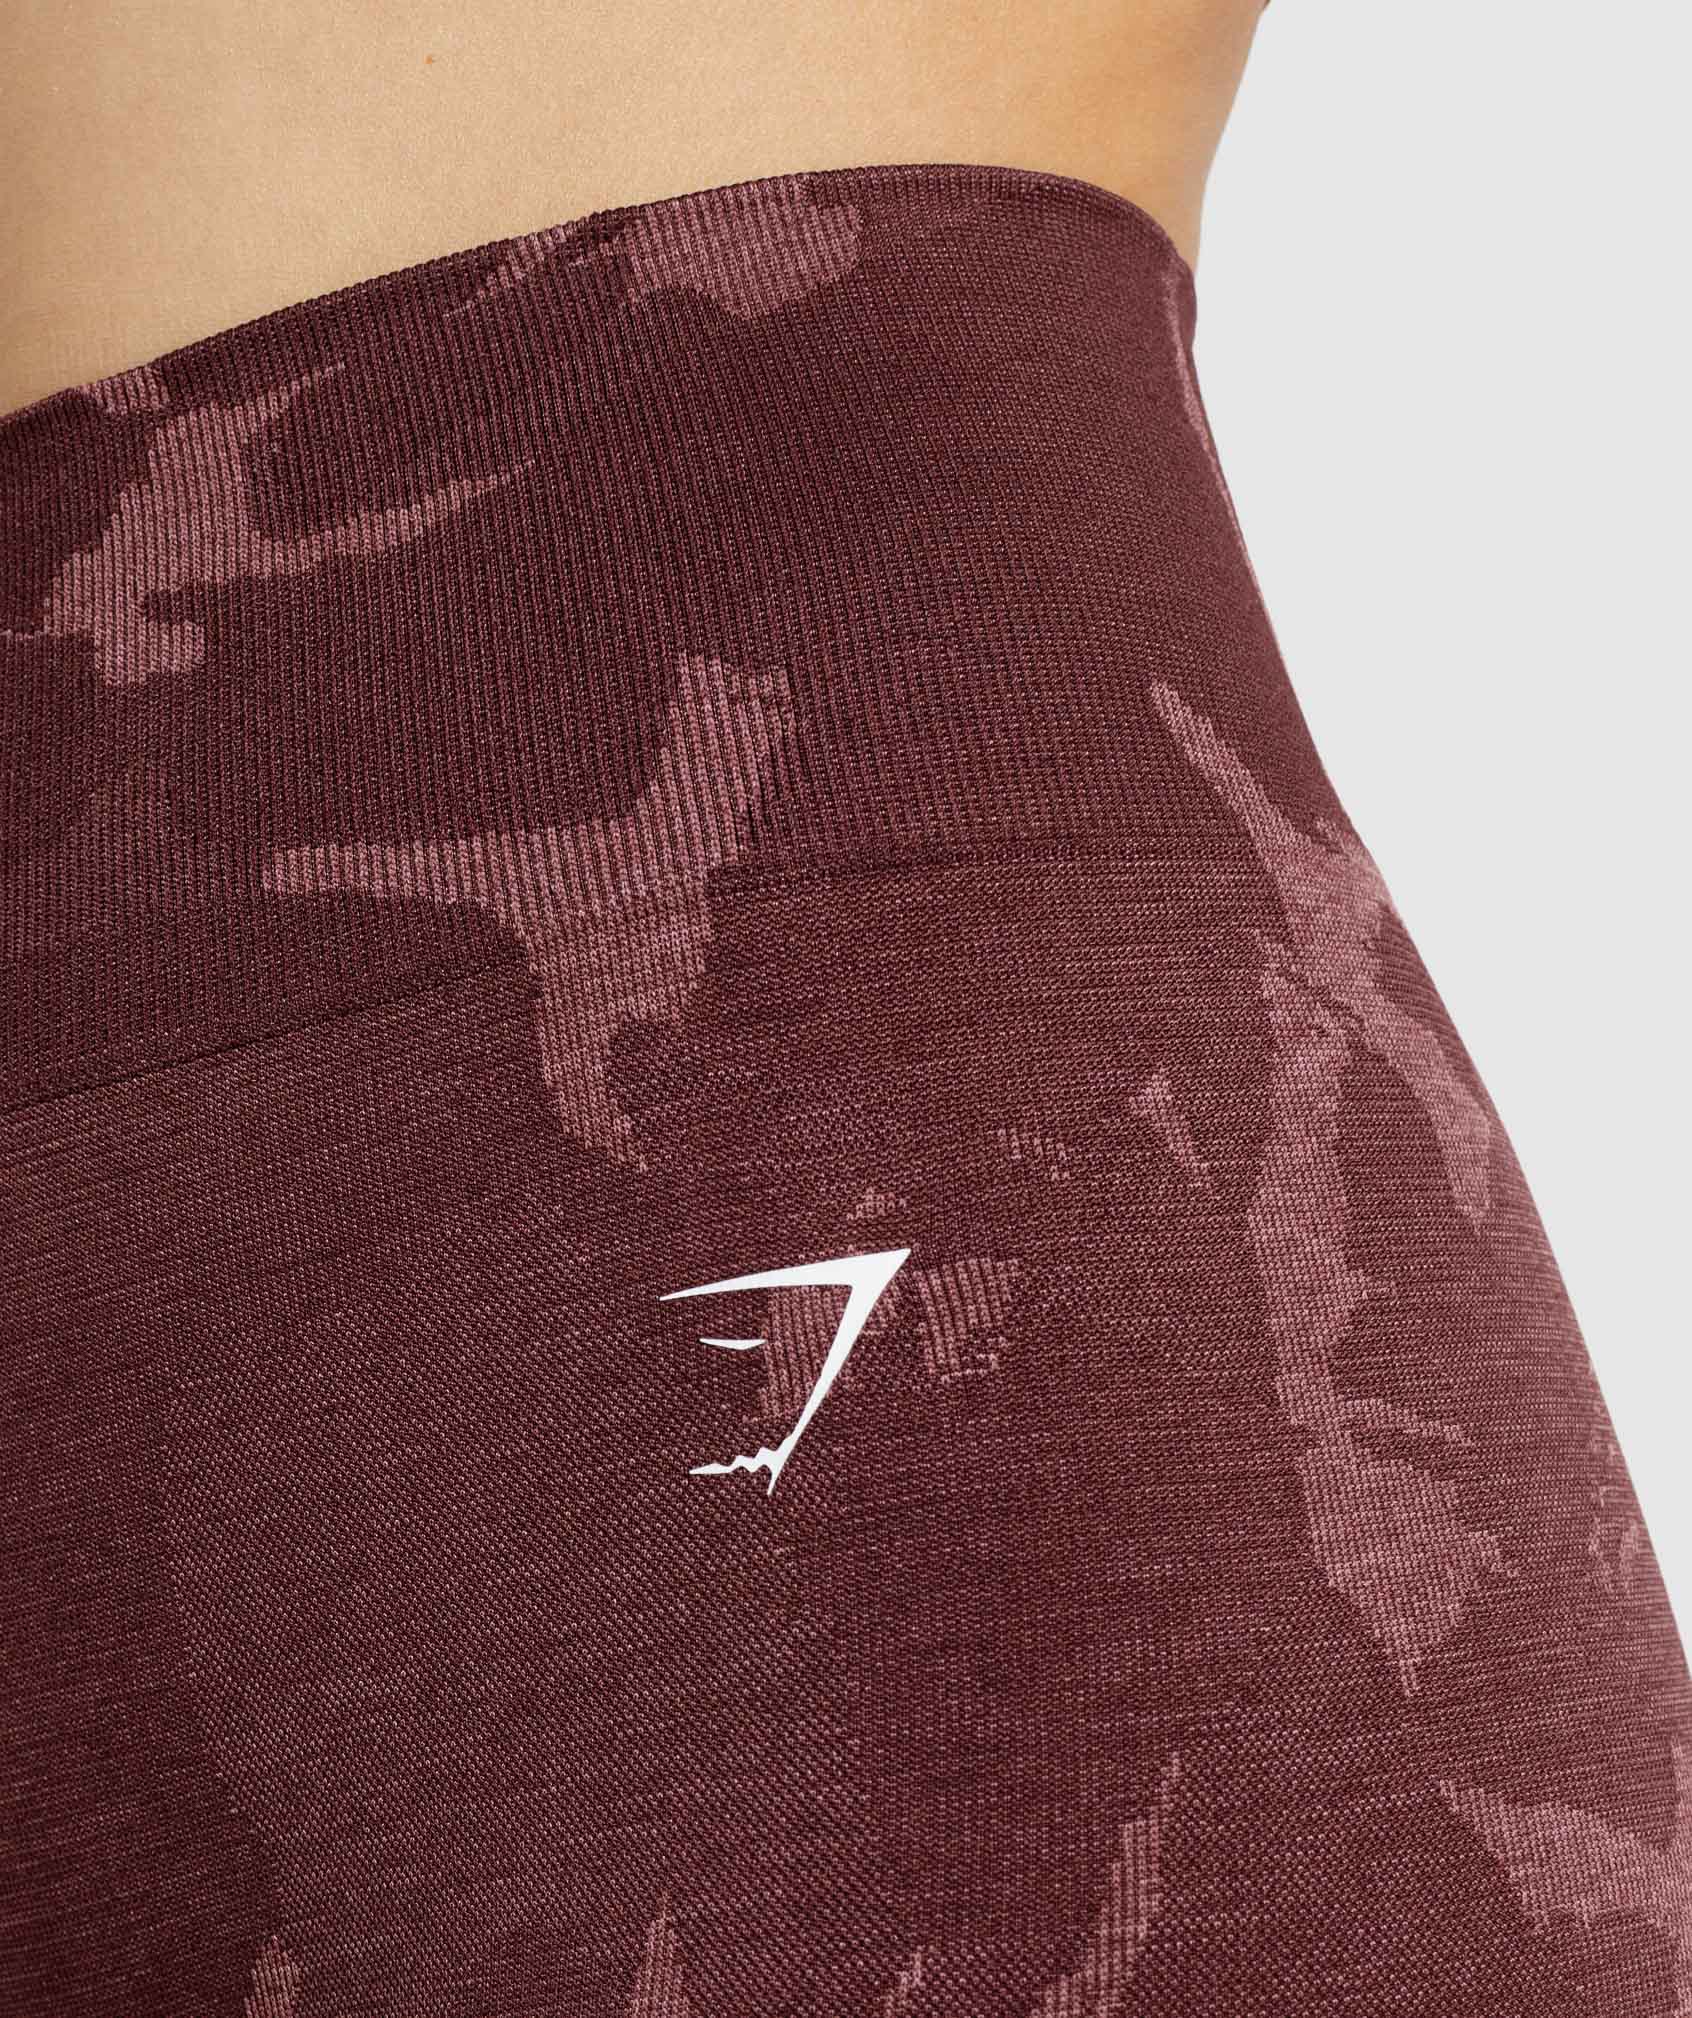 Gymshark Womens XS Cherry Brown Camouflage Adapt Seamless Gym